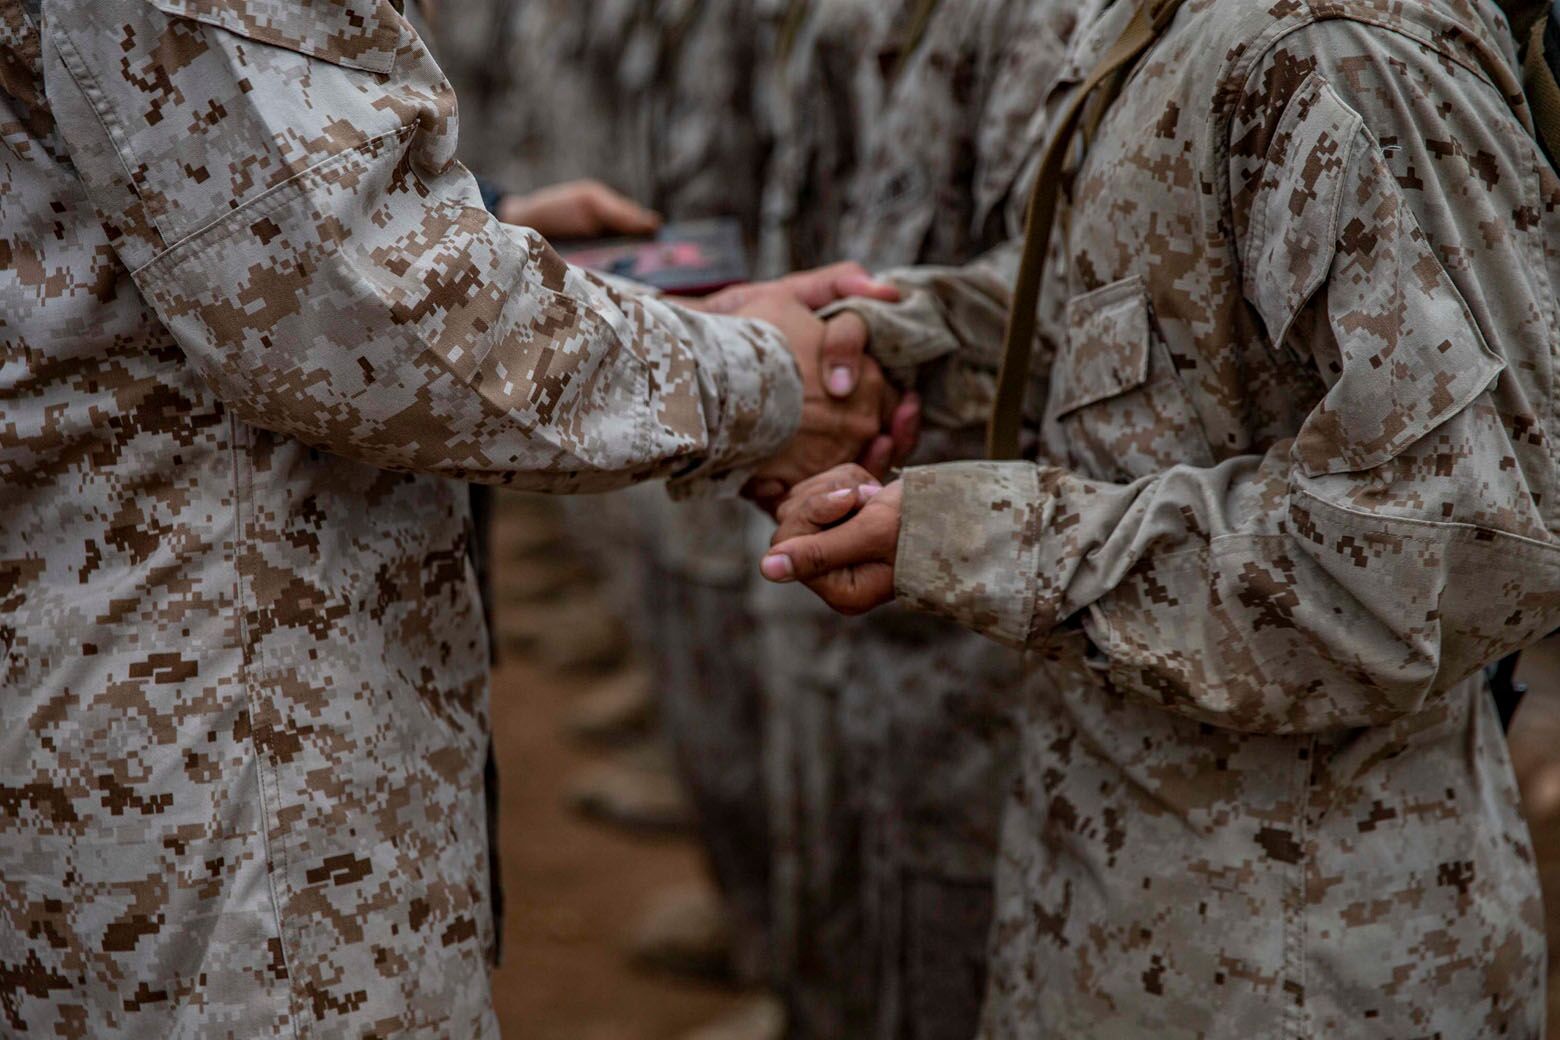 DVIDS - Images - The Crucible: the final stepping stone in becoming a  United States Marine [Image 7 of 30]